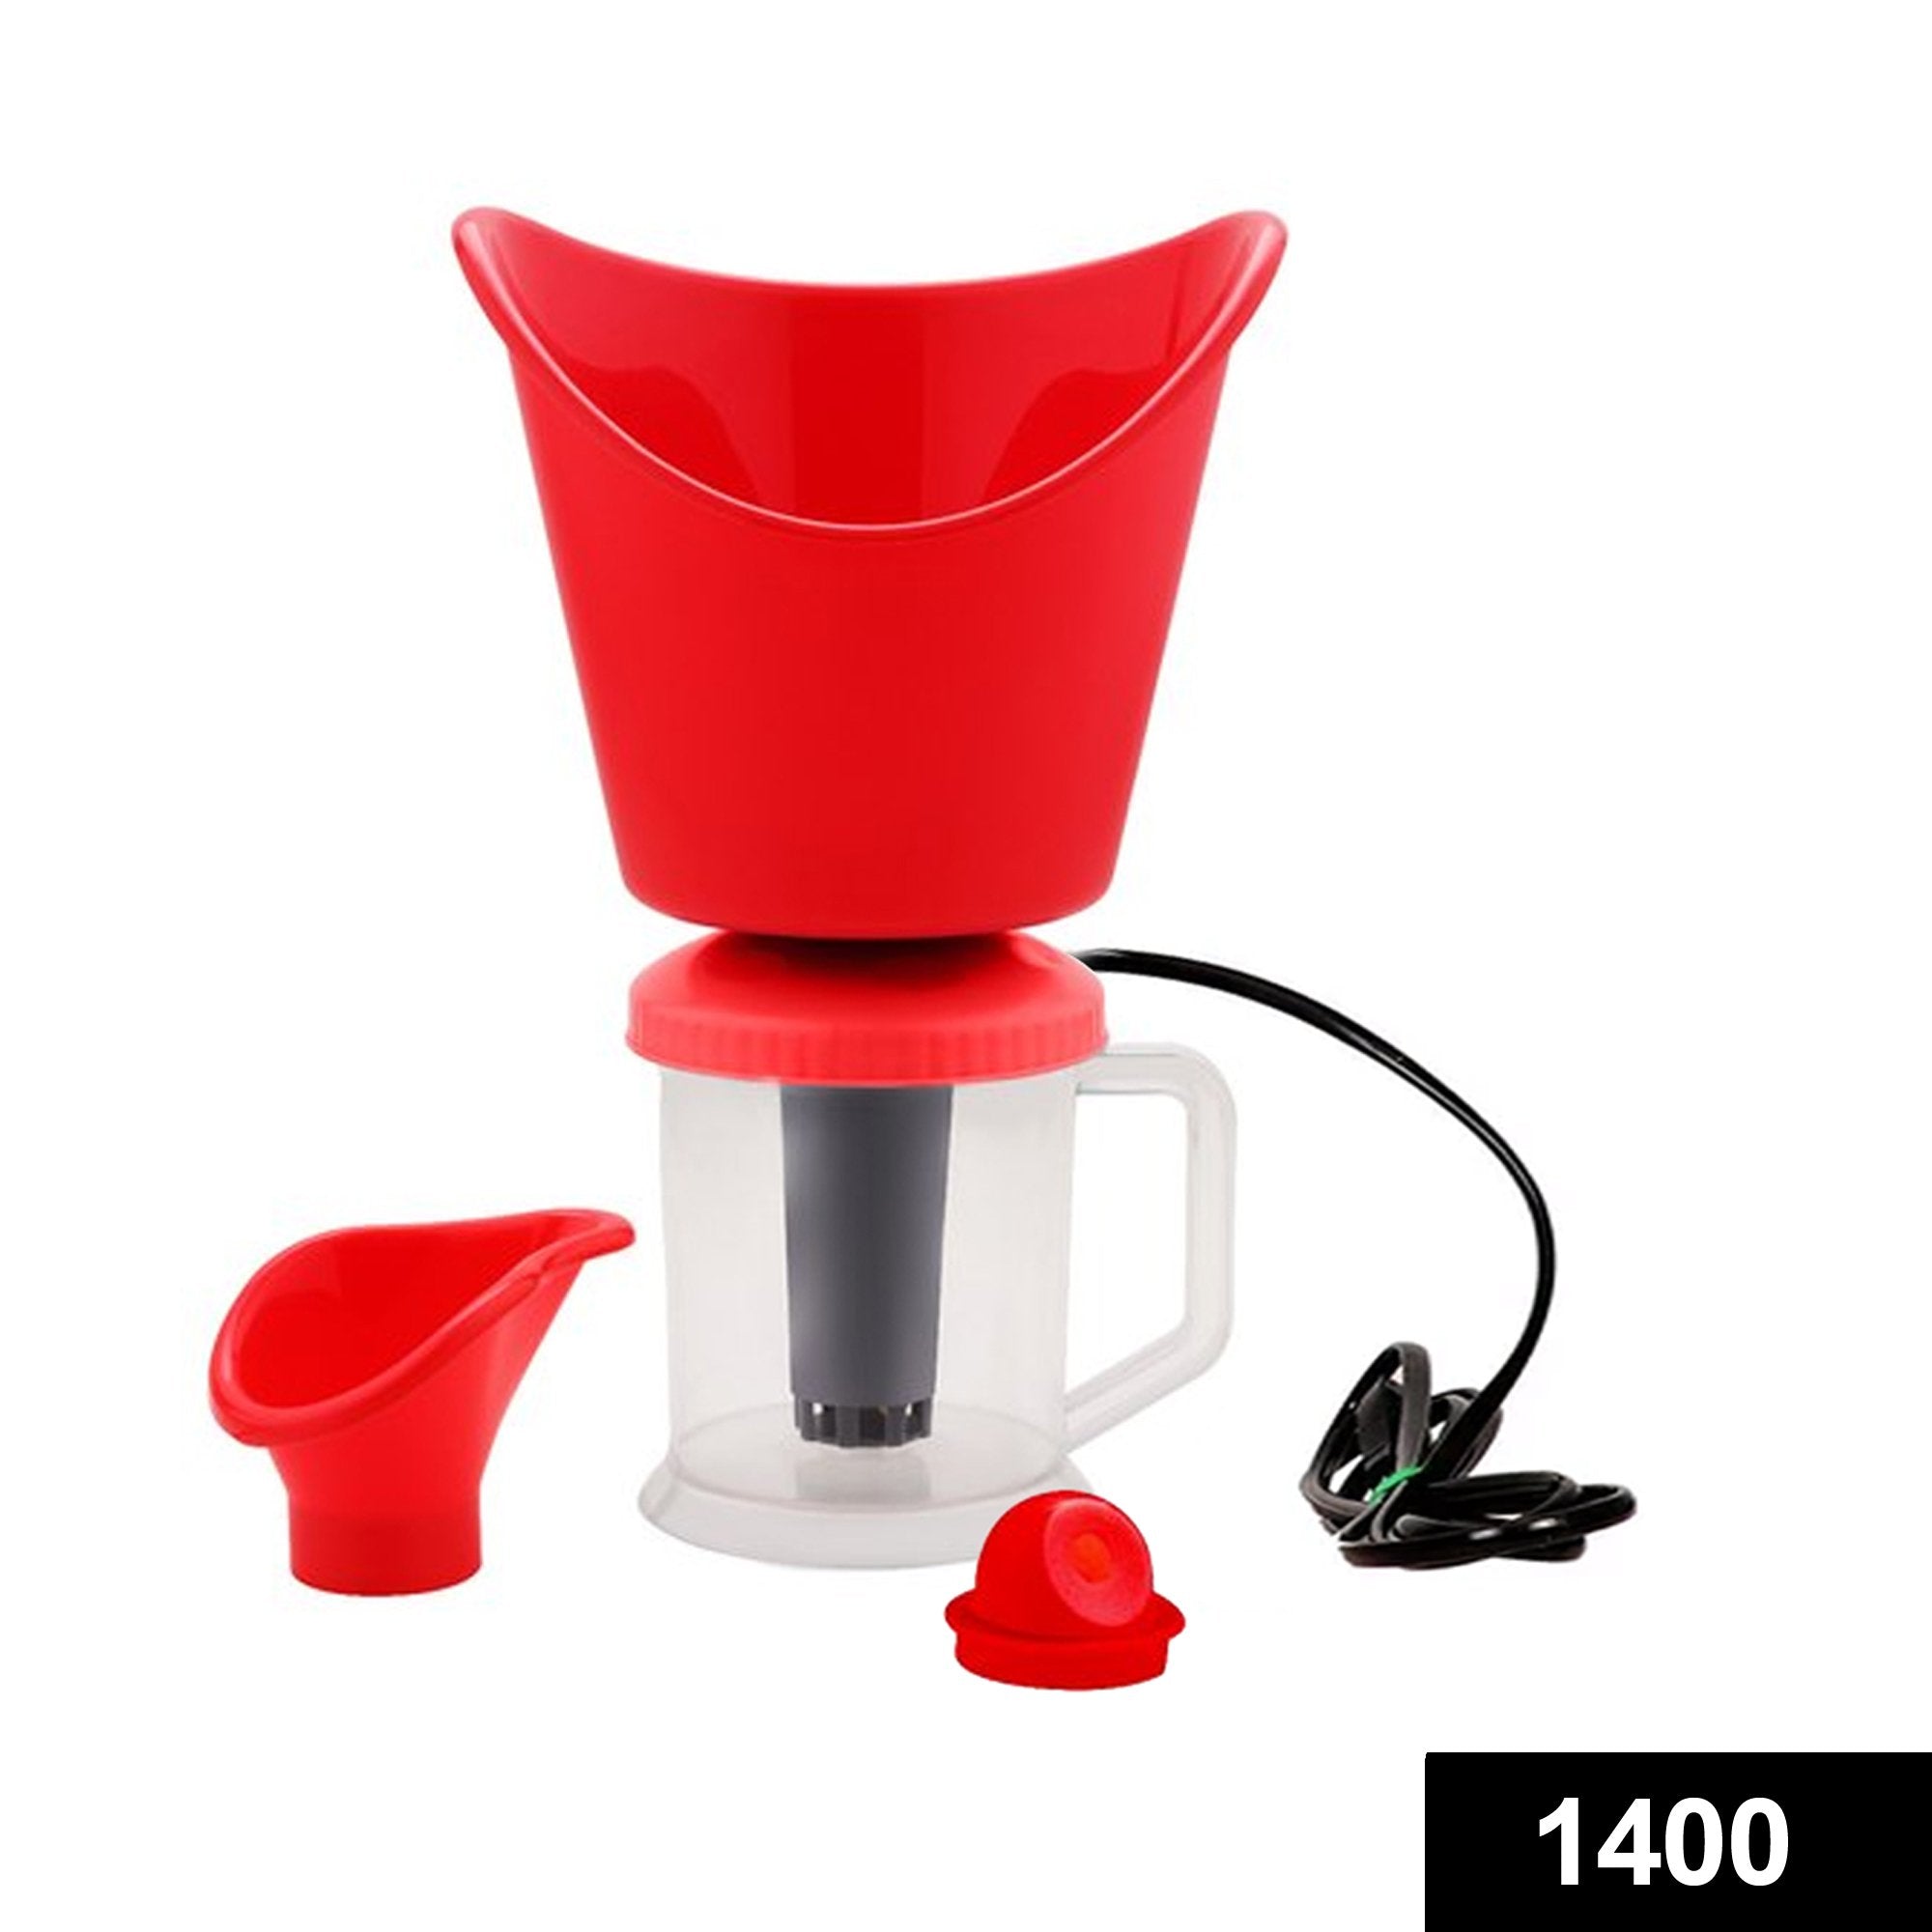 1400 Premium 3 in 1 Vaporiser steamer for cough and cold - SkyShopy